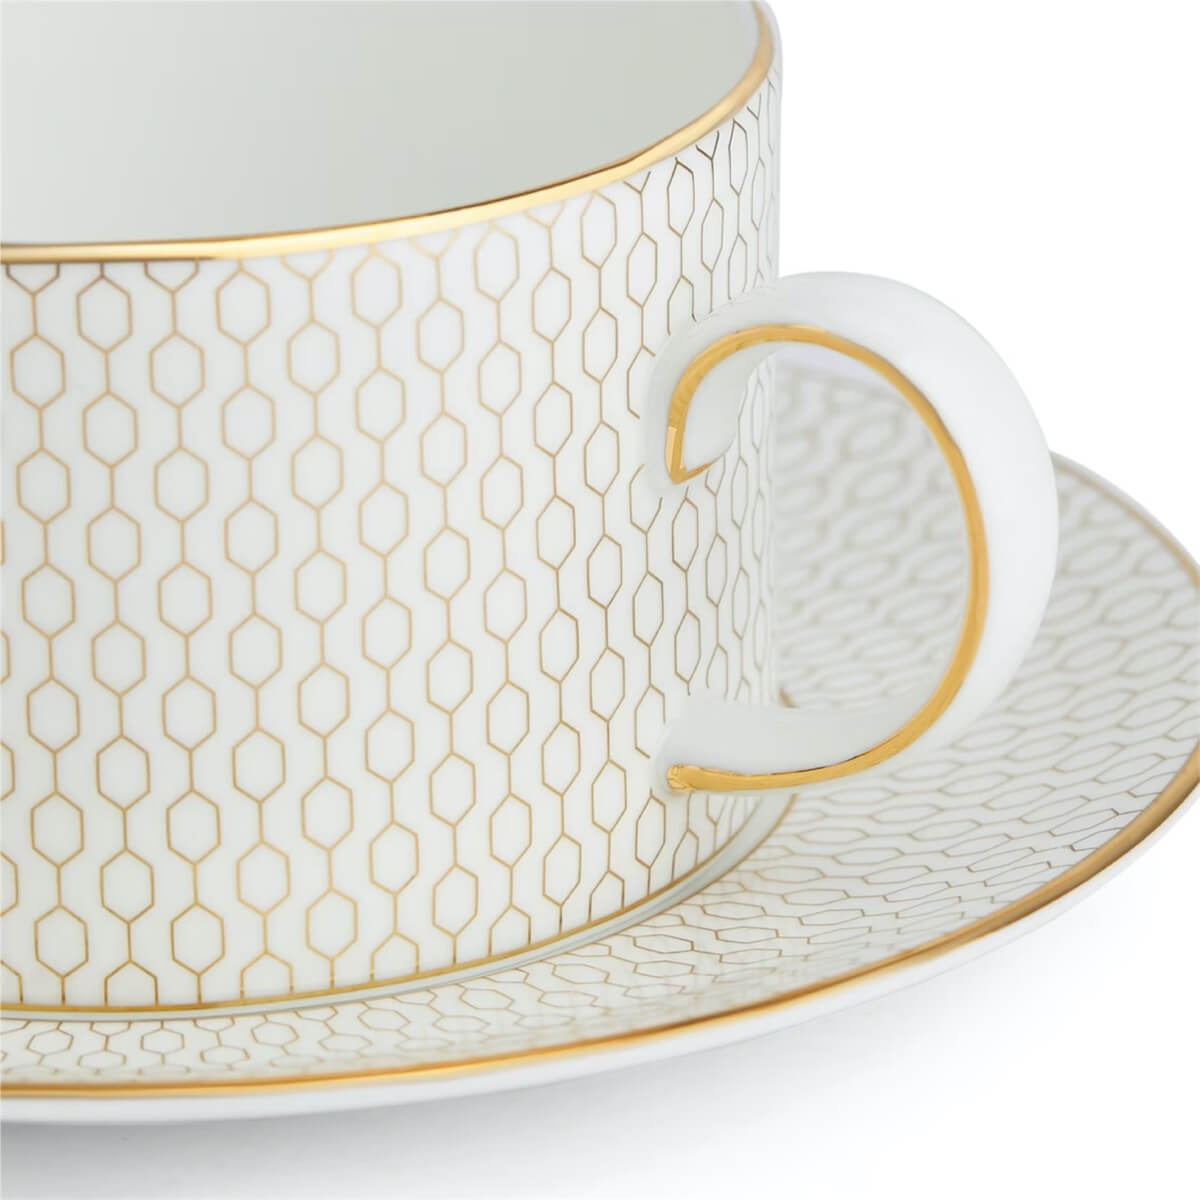 luxury brand tea cup and saucer for sale